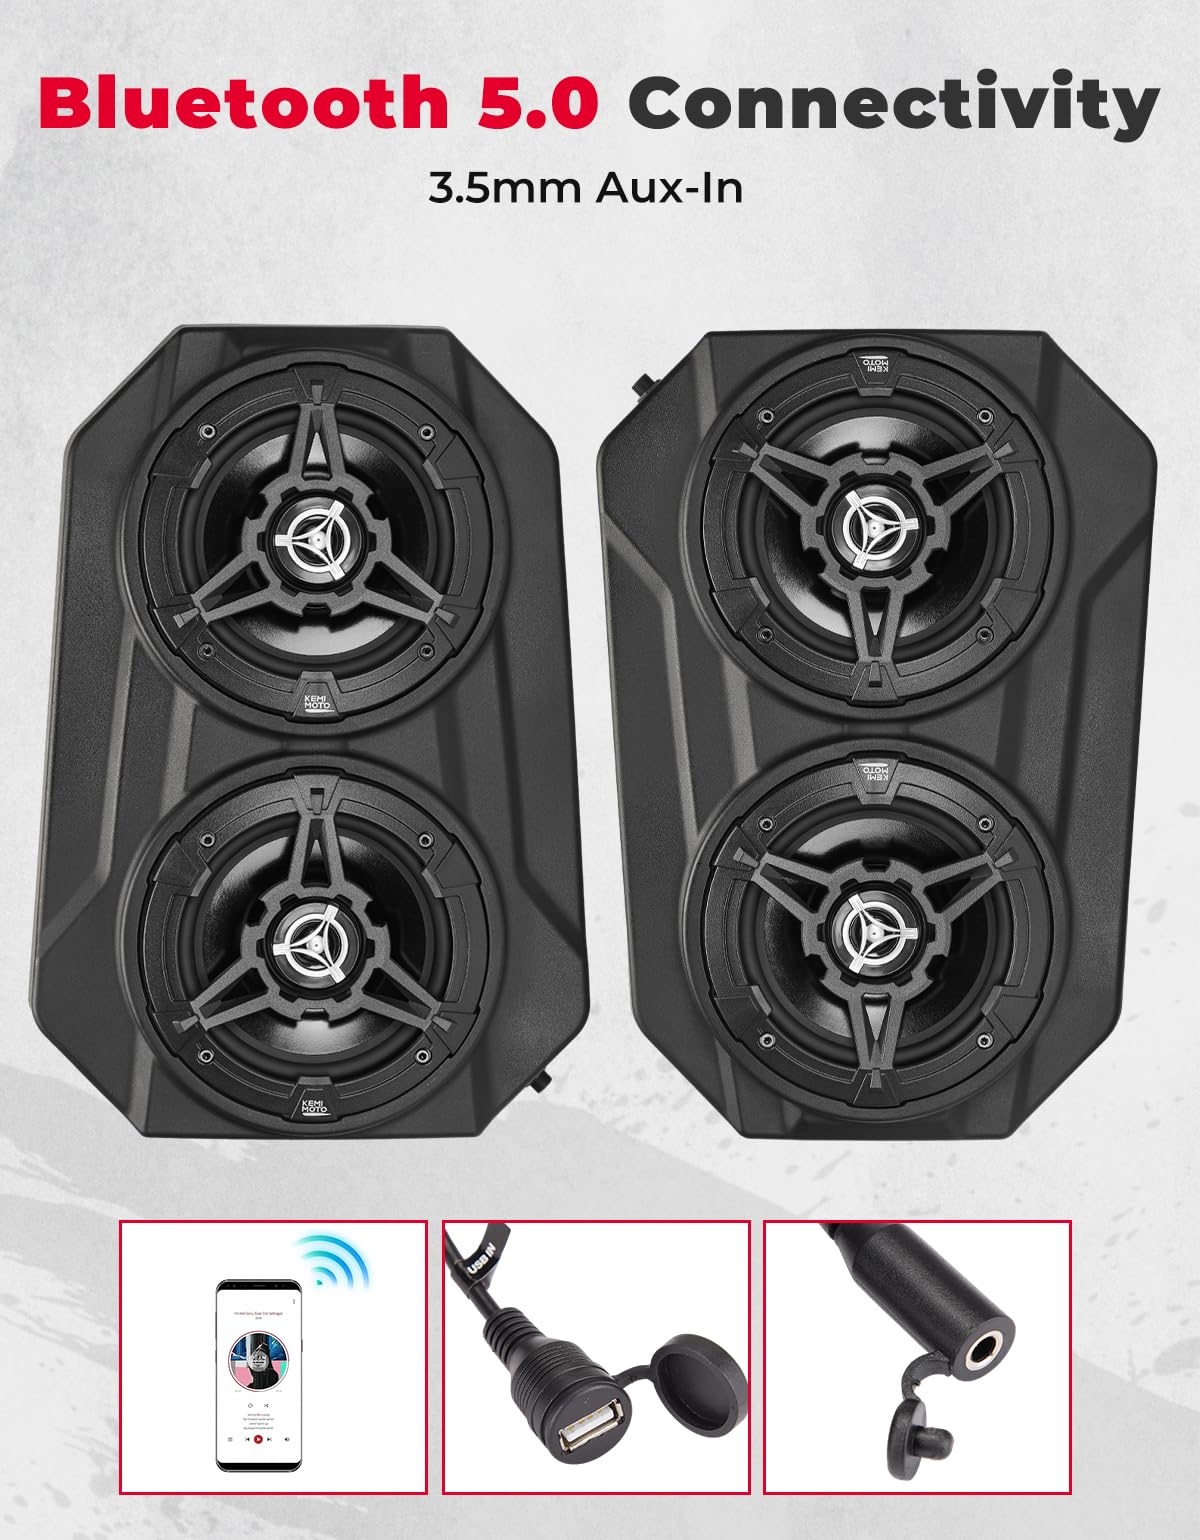 UTV Sound System 6.5 Inch Speakers Overhead Stereo Bluetooth Fits 1.625-1.9in Roll Cages - Kemimoto